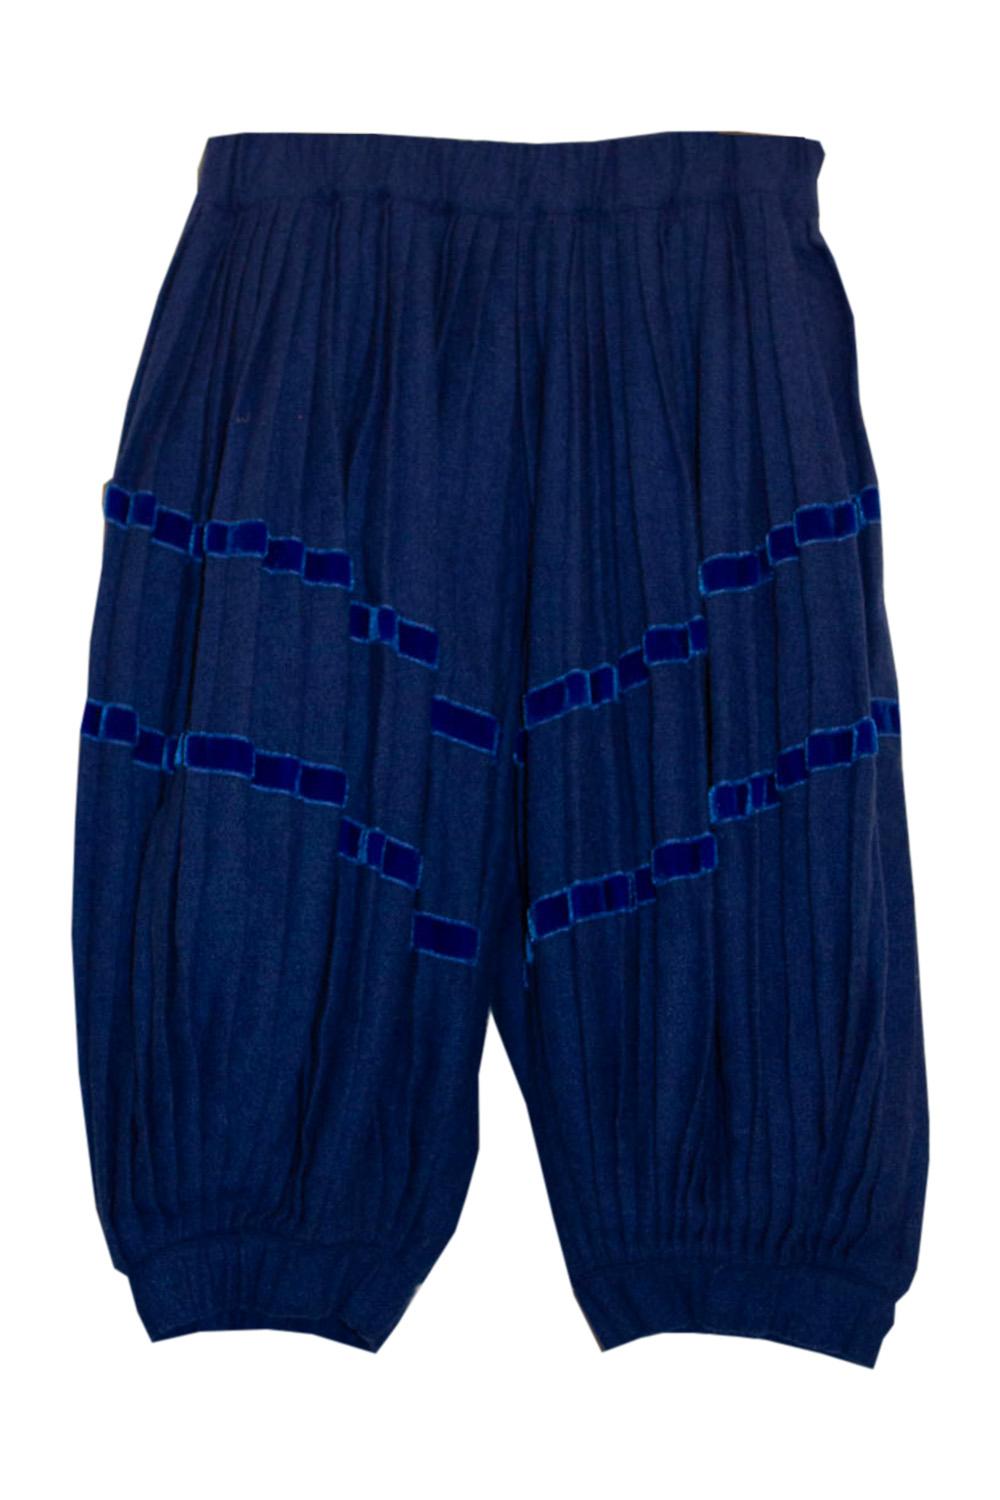 Vintage Kenzo Blue Pleated Knickerbockers/Shorts For Sale 2